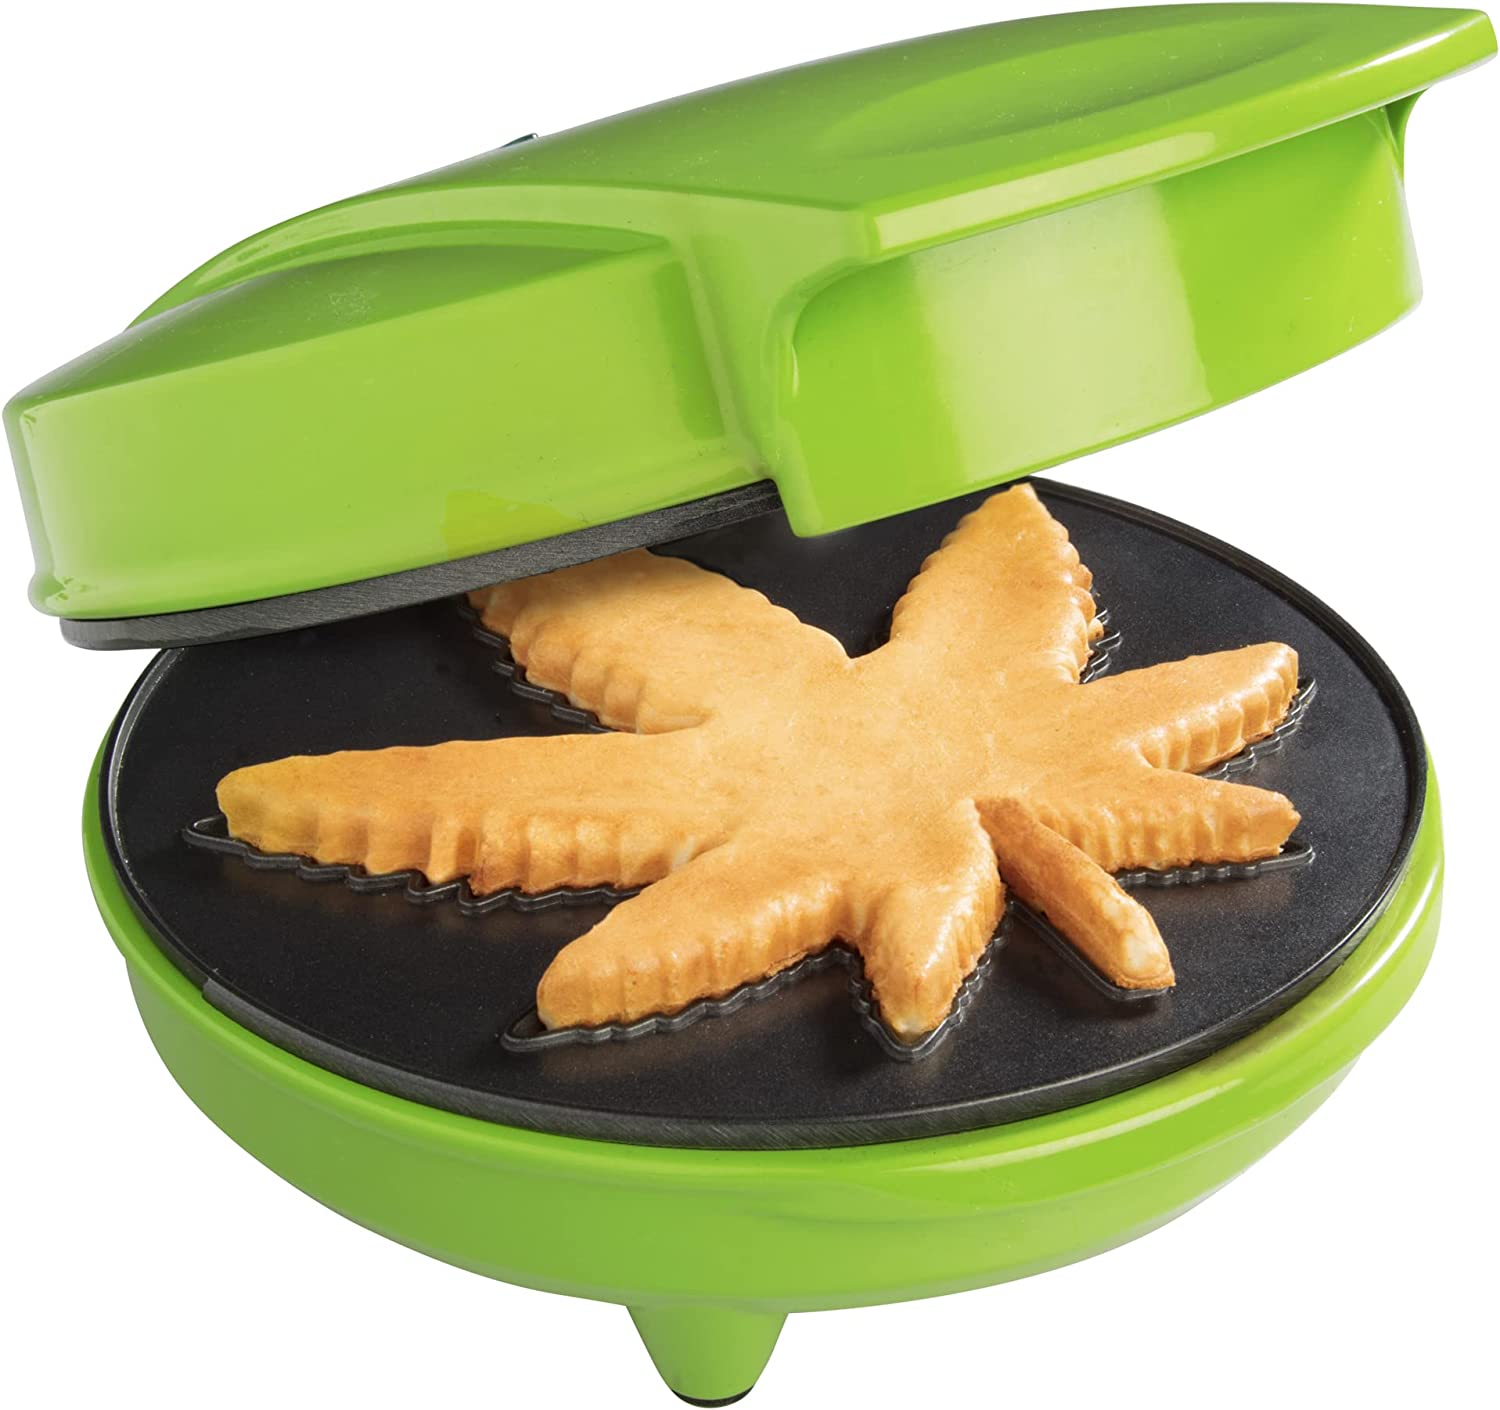 Cannabinthusiast | Cupid Approved Cannabis Gifts for Valentine’s Day - Pot Leaf Waffle Maker